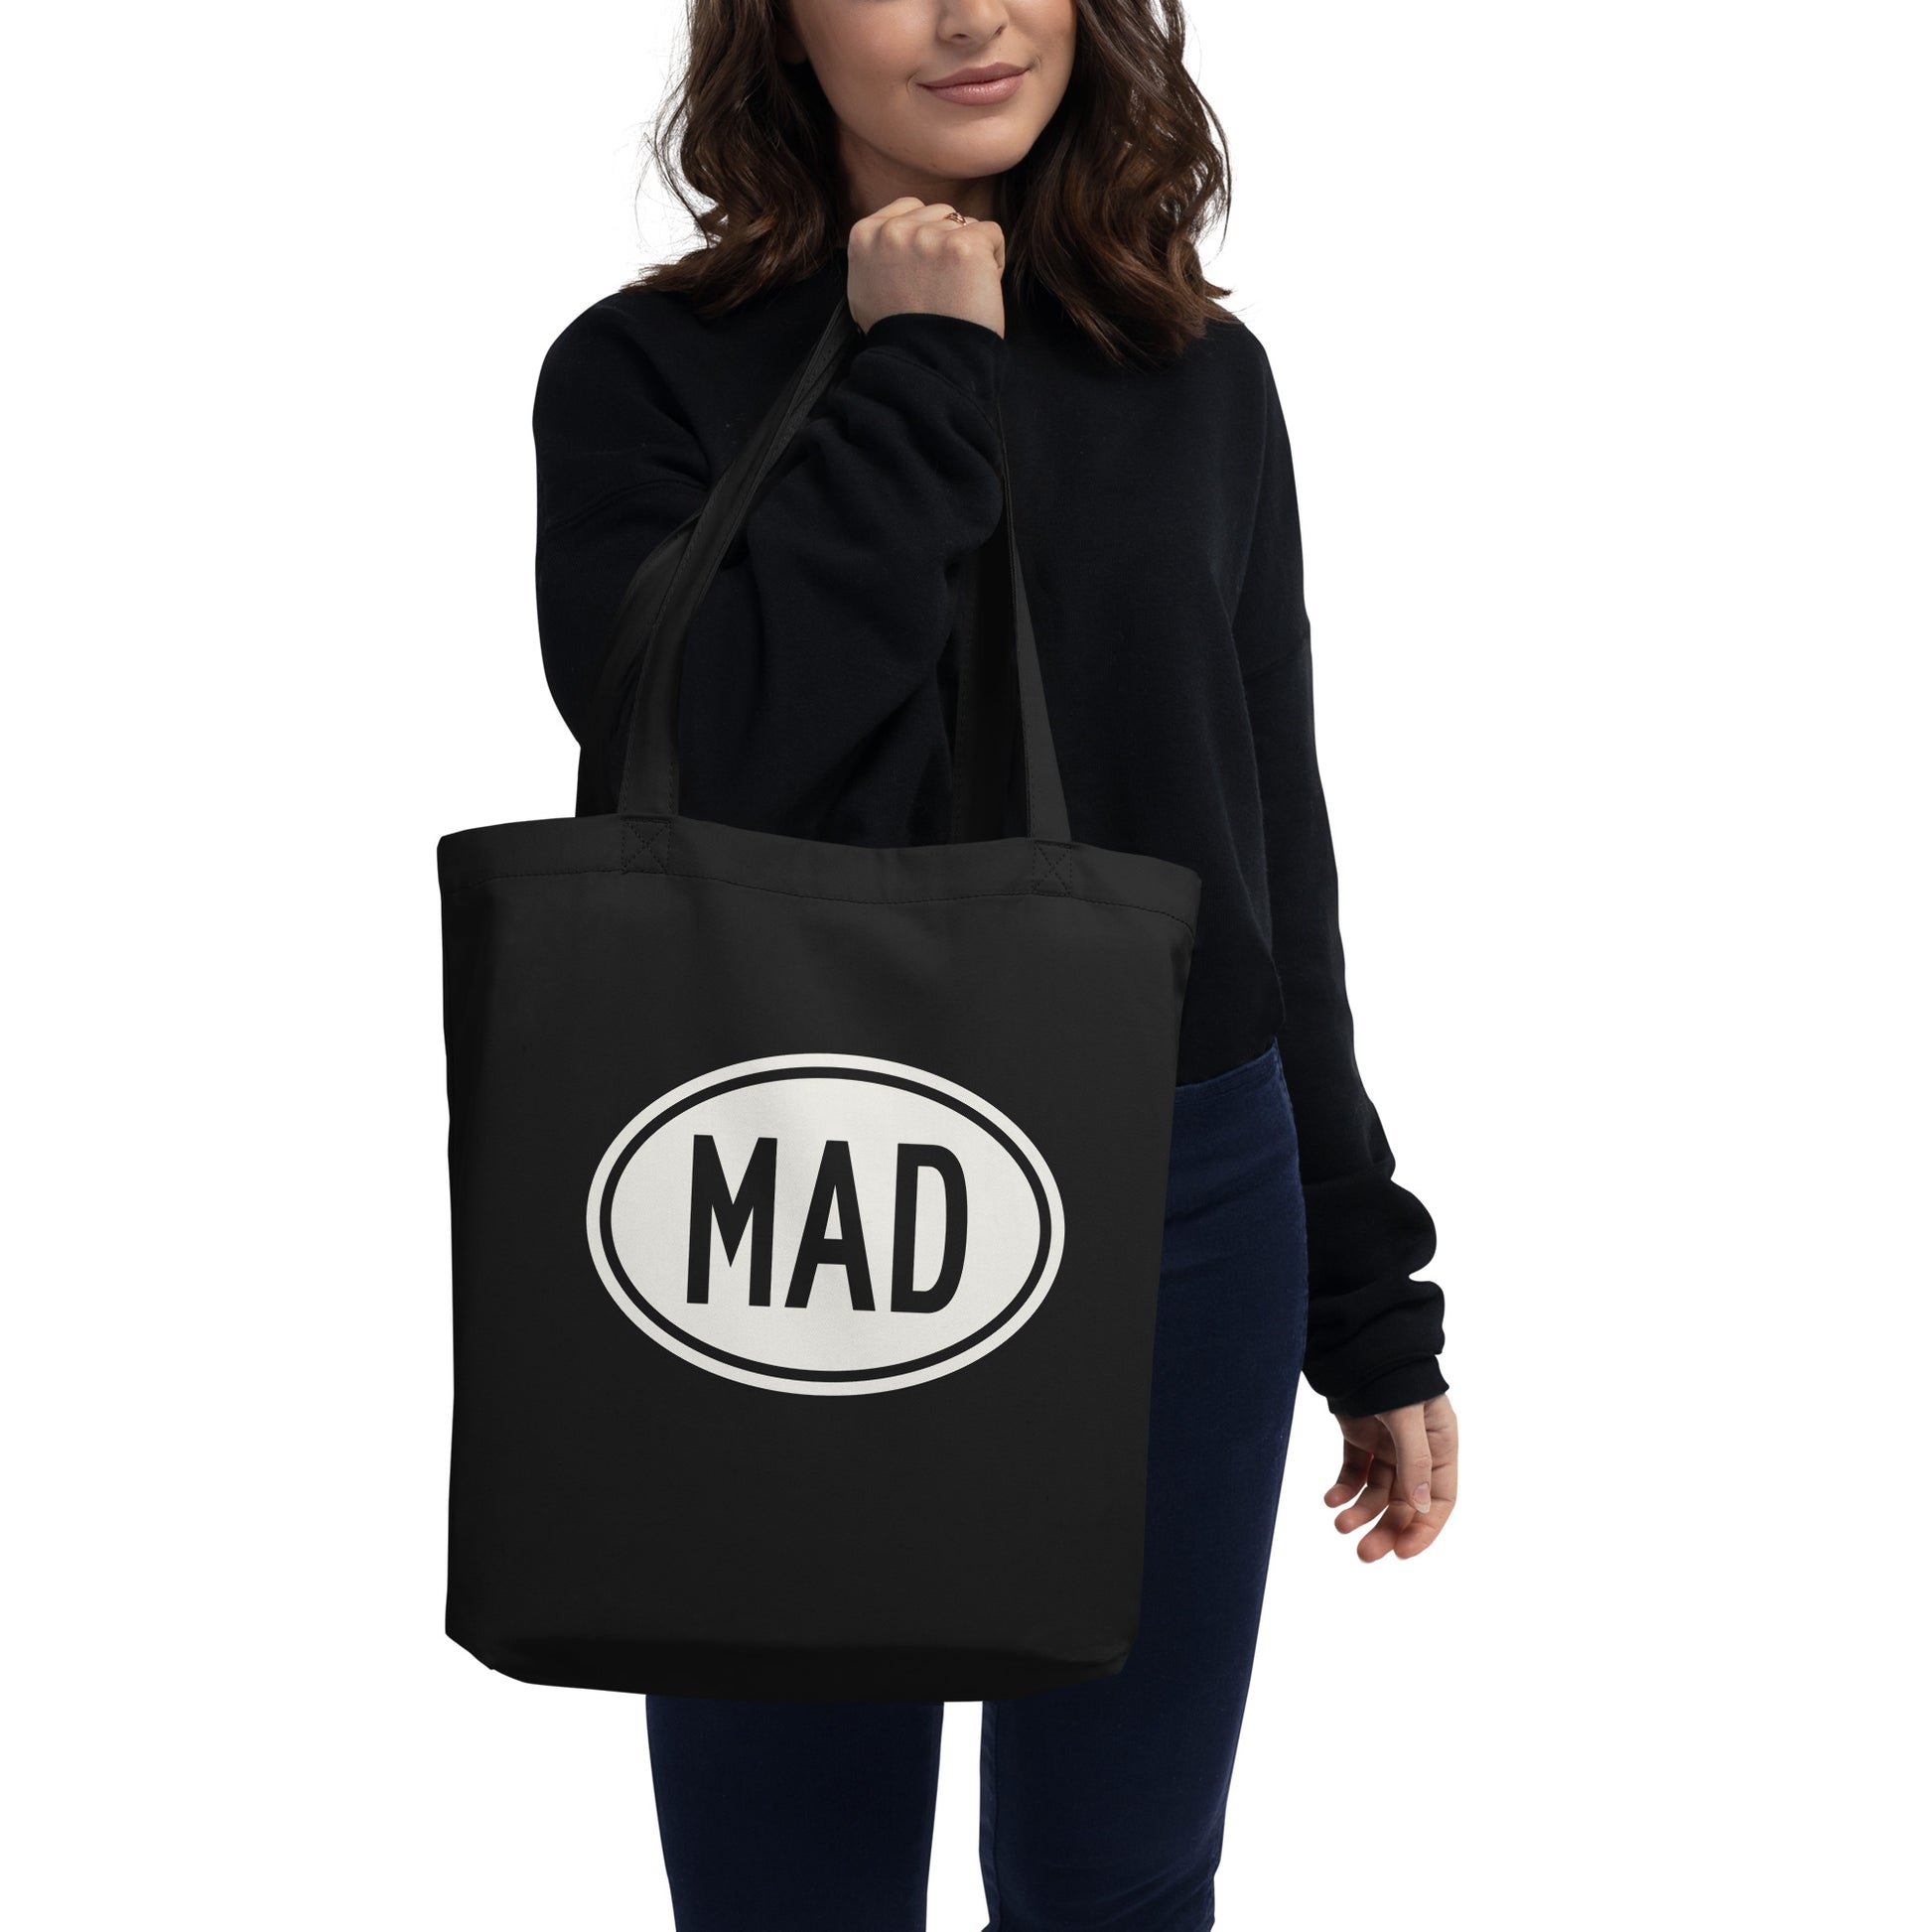 Unique Travel Gift Organic Tote - White Oval • MAD Madrid • YHM Designs - Image 03